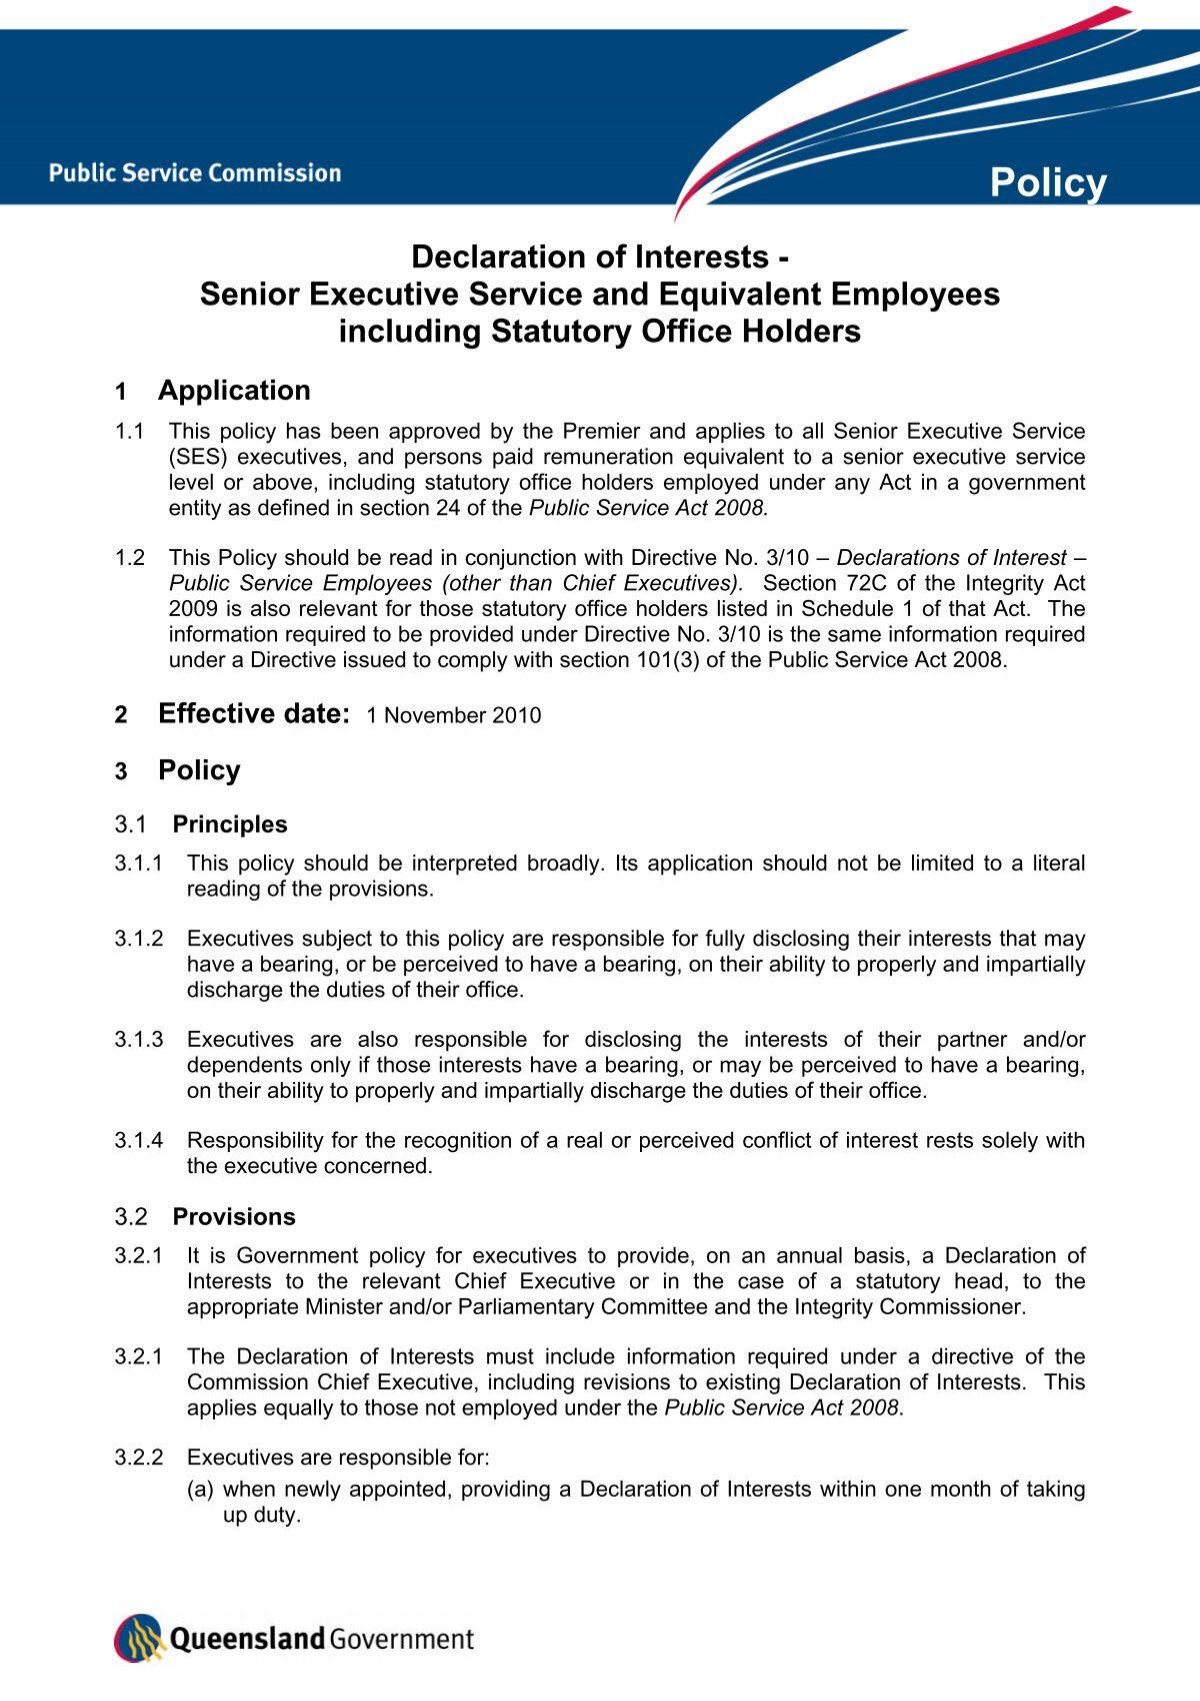 Declaration of Interests - Senior Executives and Equivalent Employees